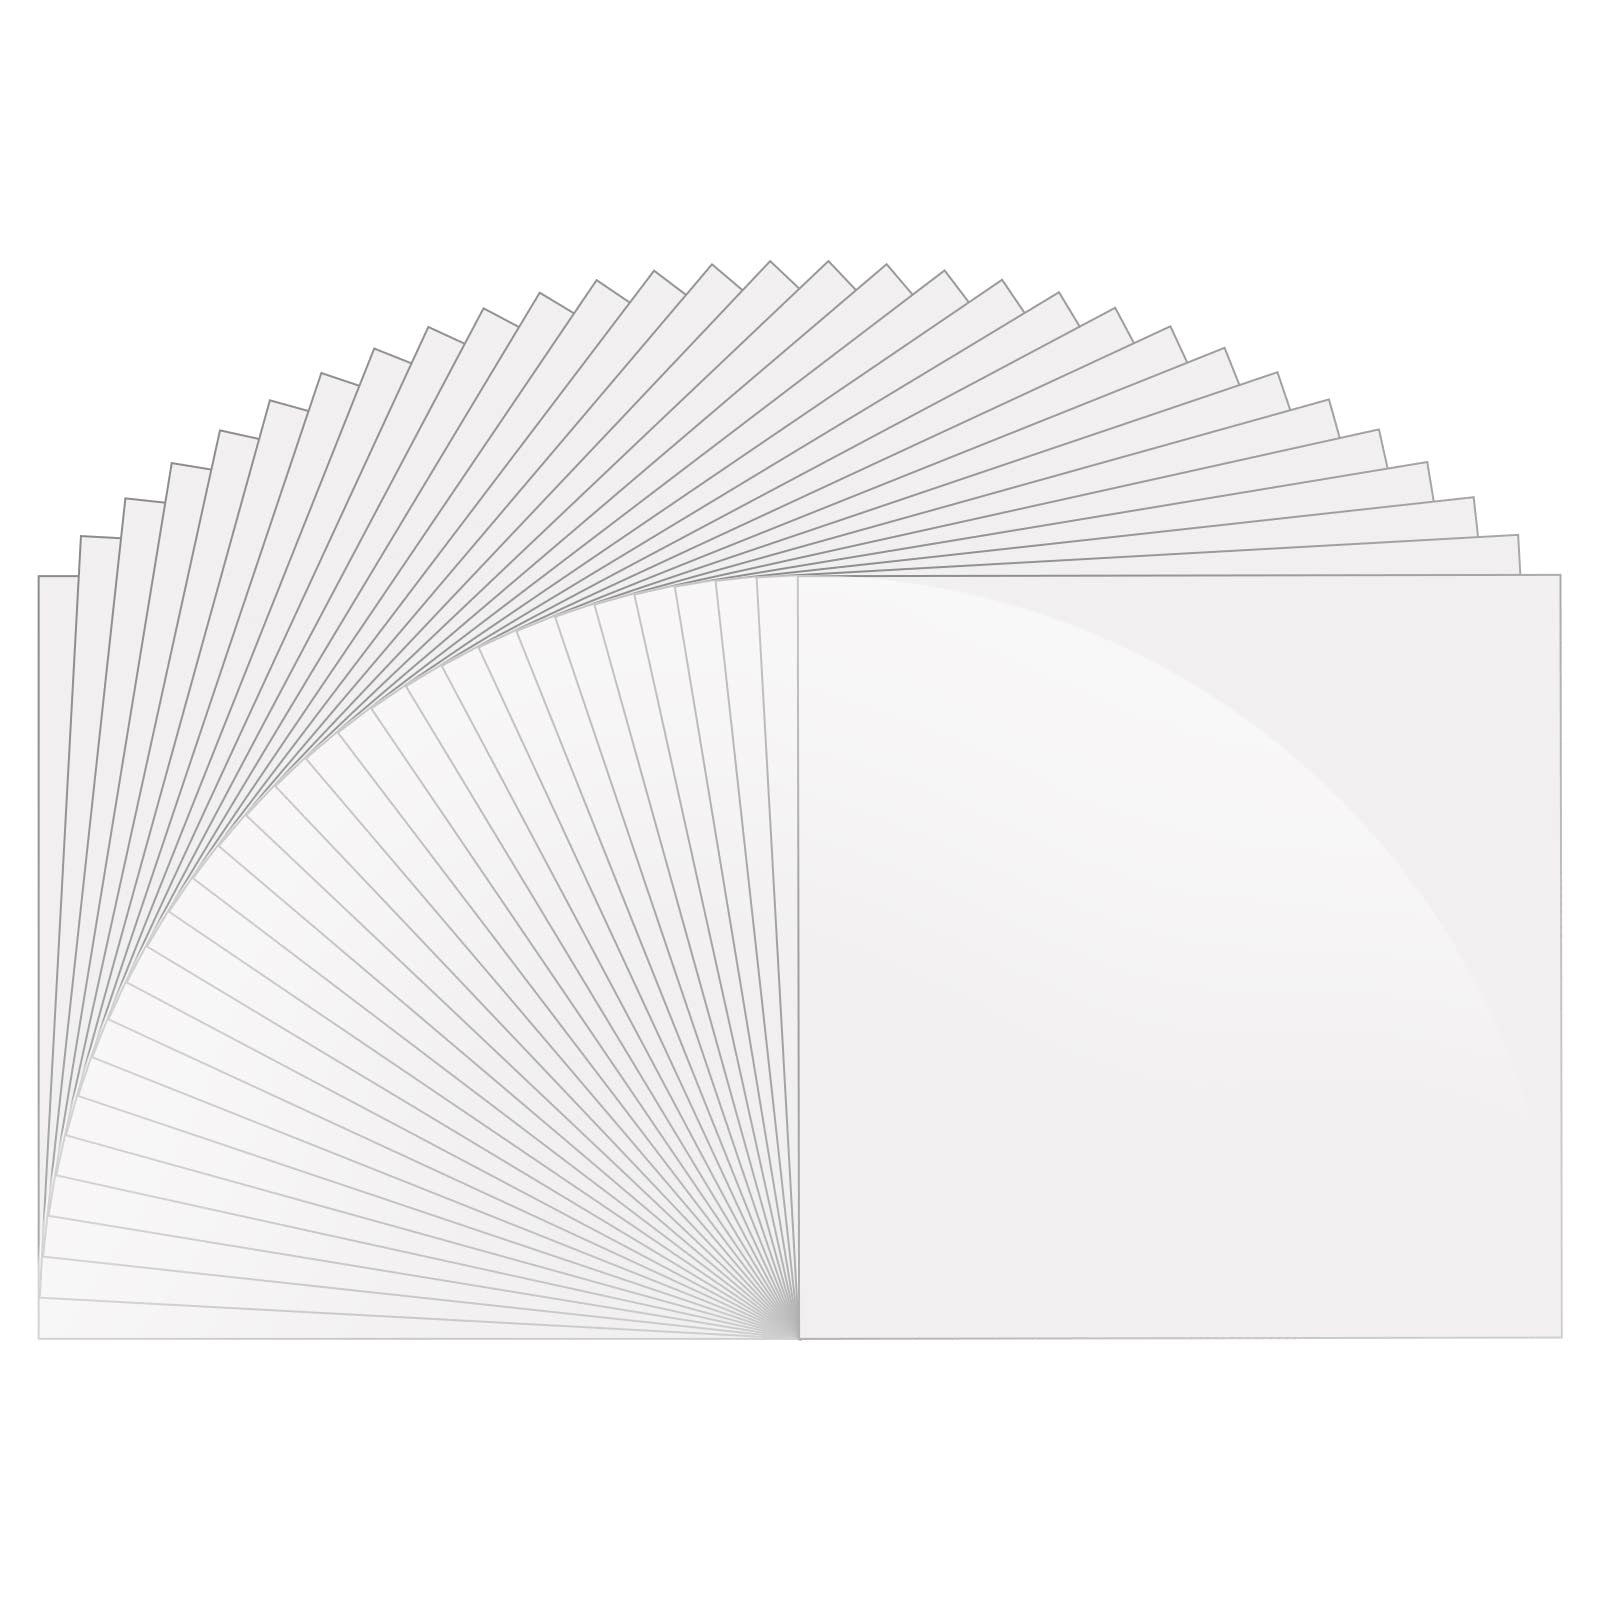 HUAXING Huaxing glossy White Permanent Vinyl for cricut, Adhesive Vinyl  Sheets (30 Pack 12A x 12A) Permanent Vinyl Bundle for Silhouette